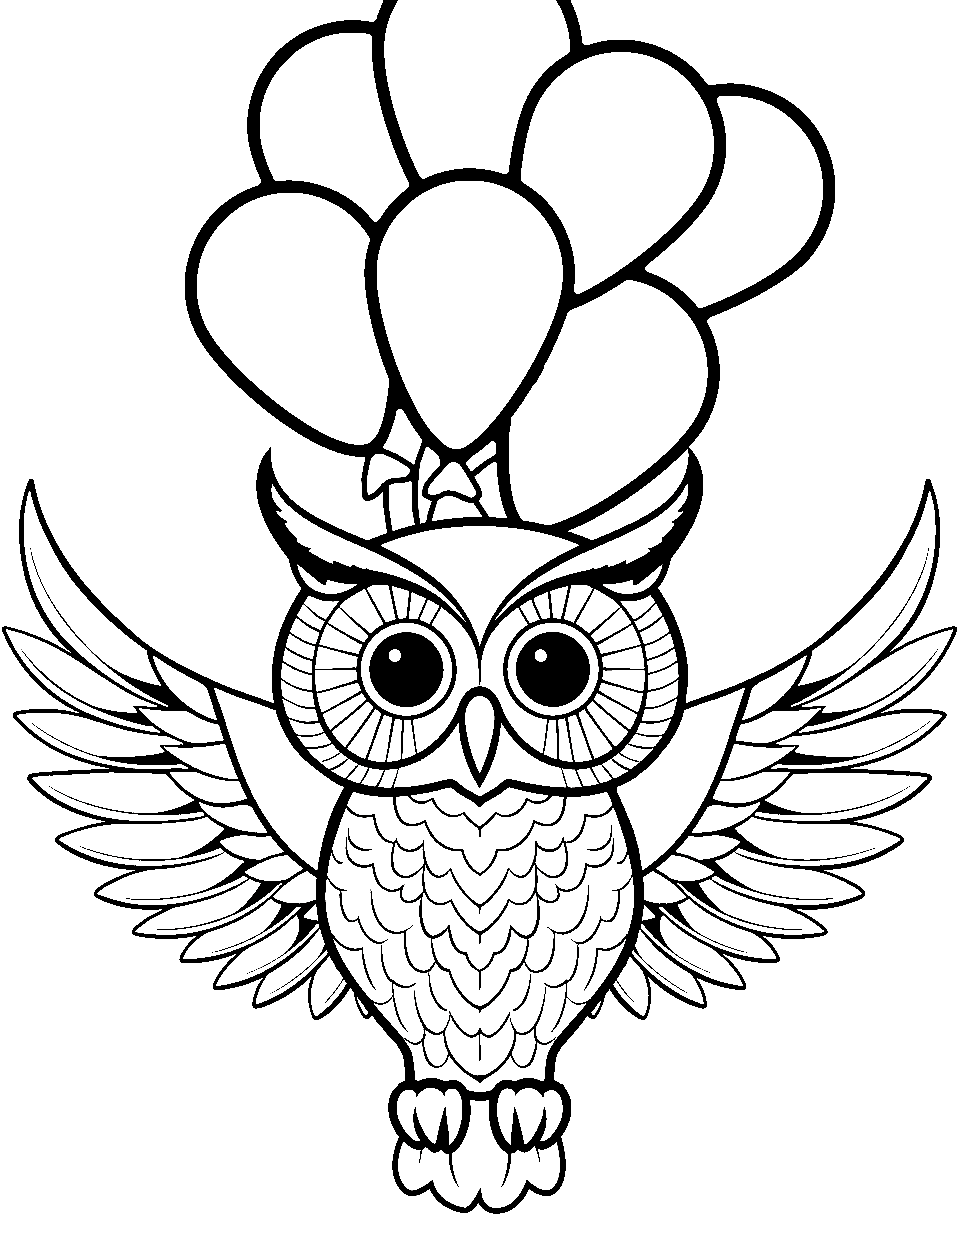 Playful Owl with Balloons Coloring Page - An owl flying with colorful balloons tied to it.